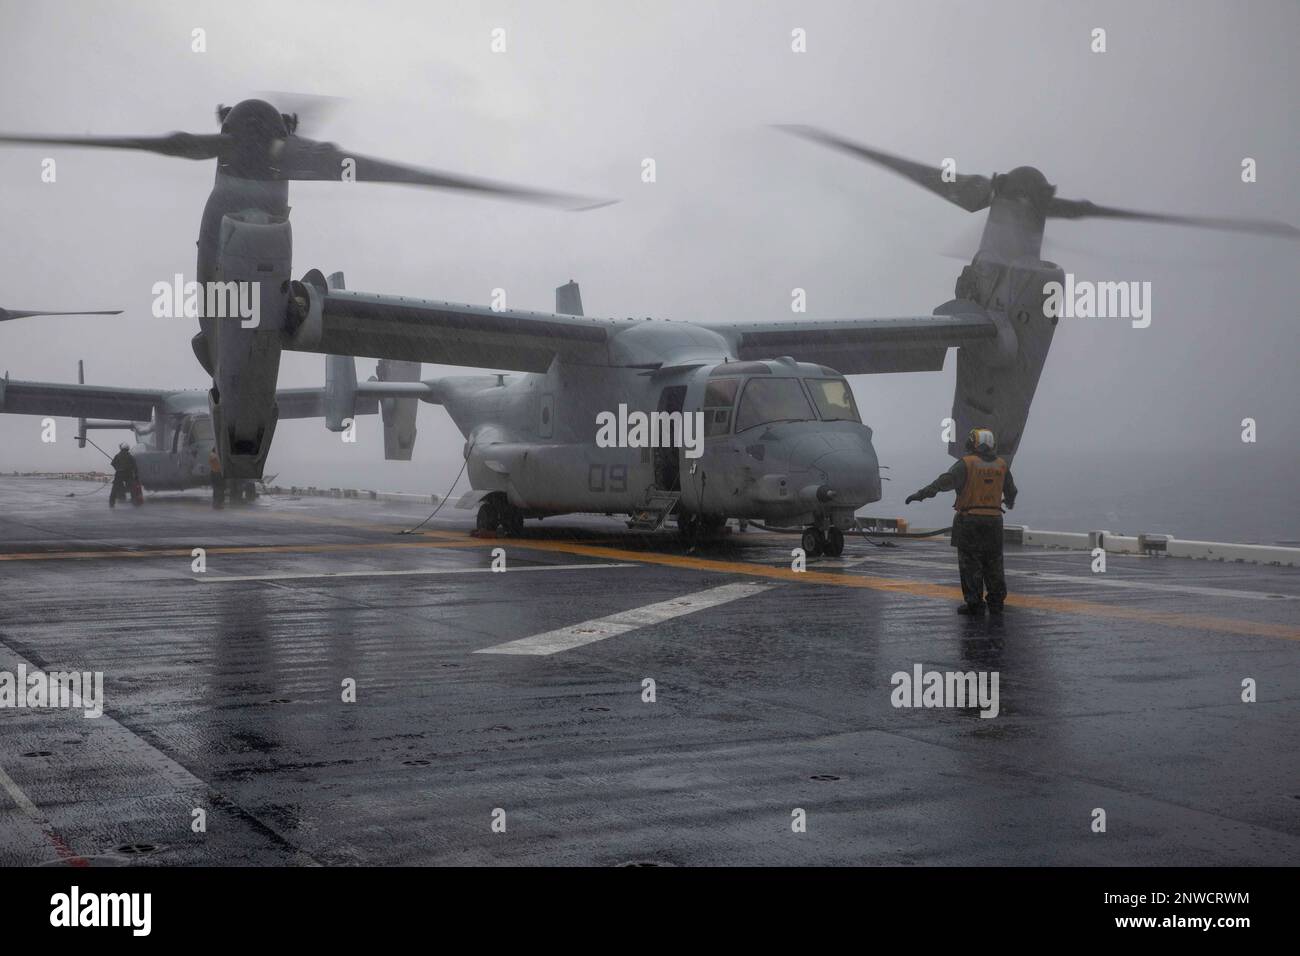 230124-N-IV962-1006    Aviation Boatswain’s Mate (Handling) 3rd Class Ernest Pelicano directs an MV-22 Osprey, assigned to Marine Medium Tiltrotor Squadron (VMM) 362 (Rein.), 13th Marine Expeditionary Unit (MEU), on the flight deck of amphibious assault ship USS Makin Island (LHD 8), Jan. 2, 2023 in the South China Sea. The Makin Island ARG/13th MEU serves as America’s forward-postured force, ready to respond to emergencies and threats with flexible, adaptable force packages that are capable of a wide array of missions. The Makin Island Amphibious Ready Group, comprised of amphibious assault s Stock Photo